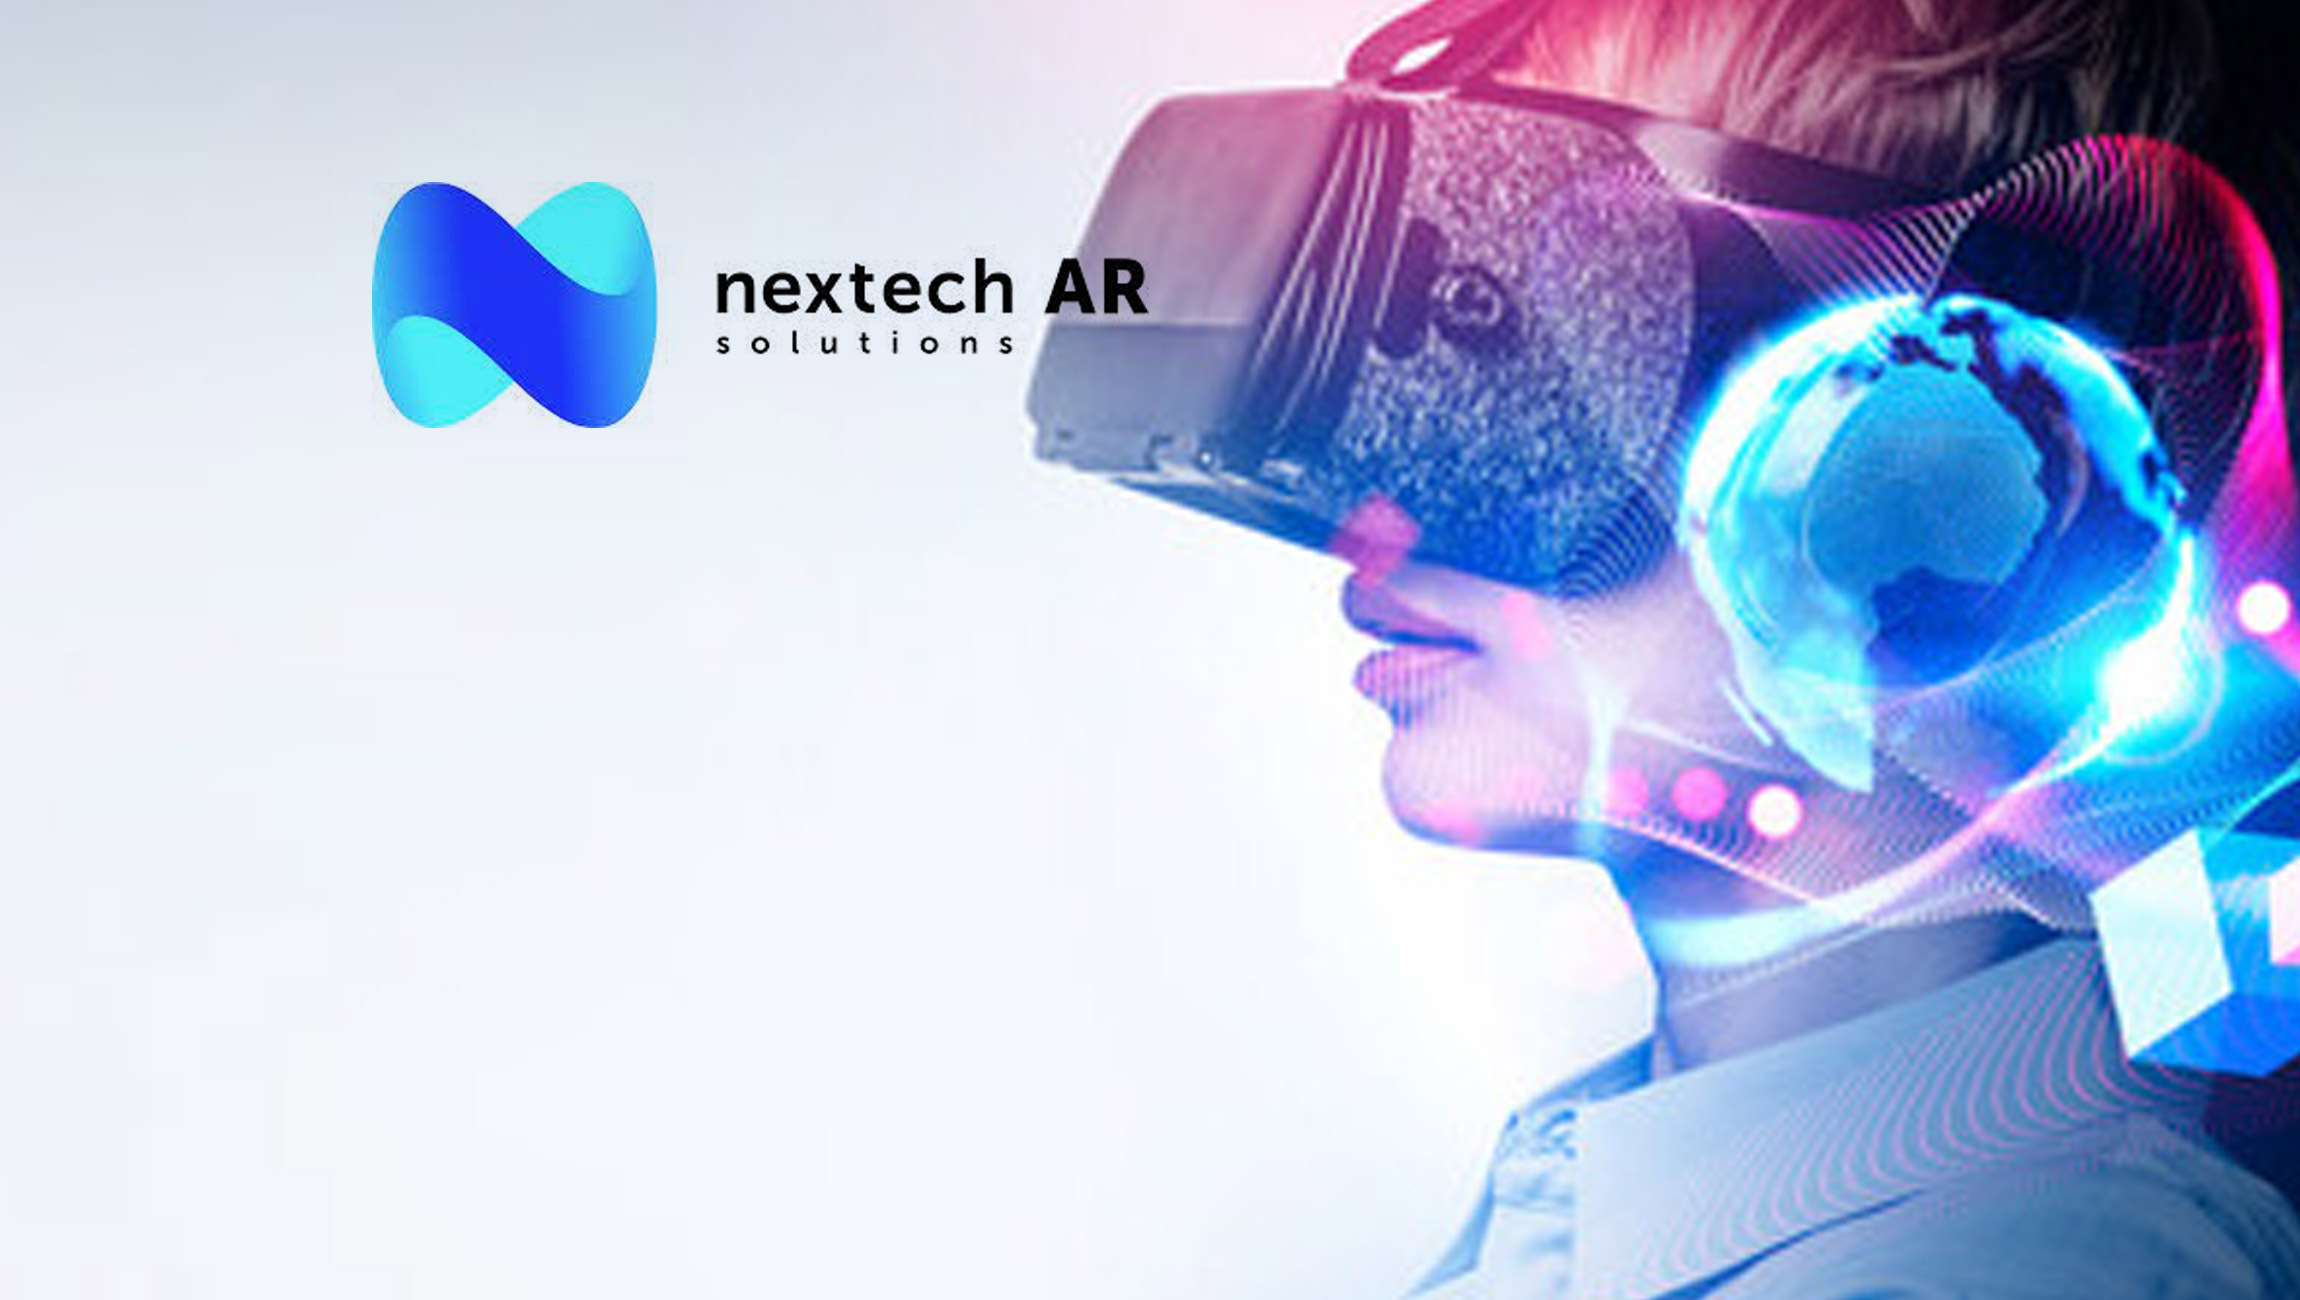 Join-Nextech-AR-For-a-Proactive-Livestream-Event-on-February-23_-2022